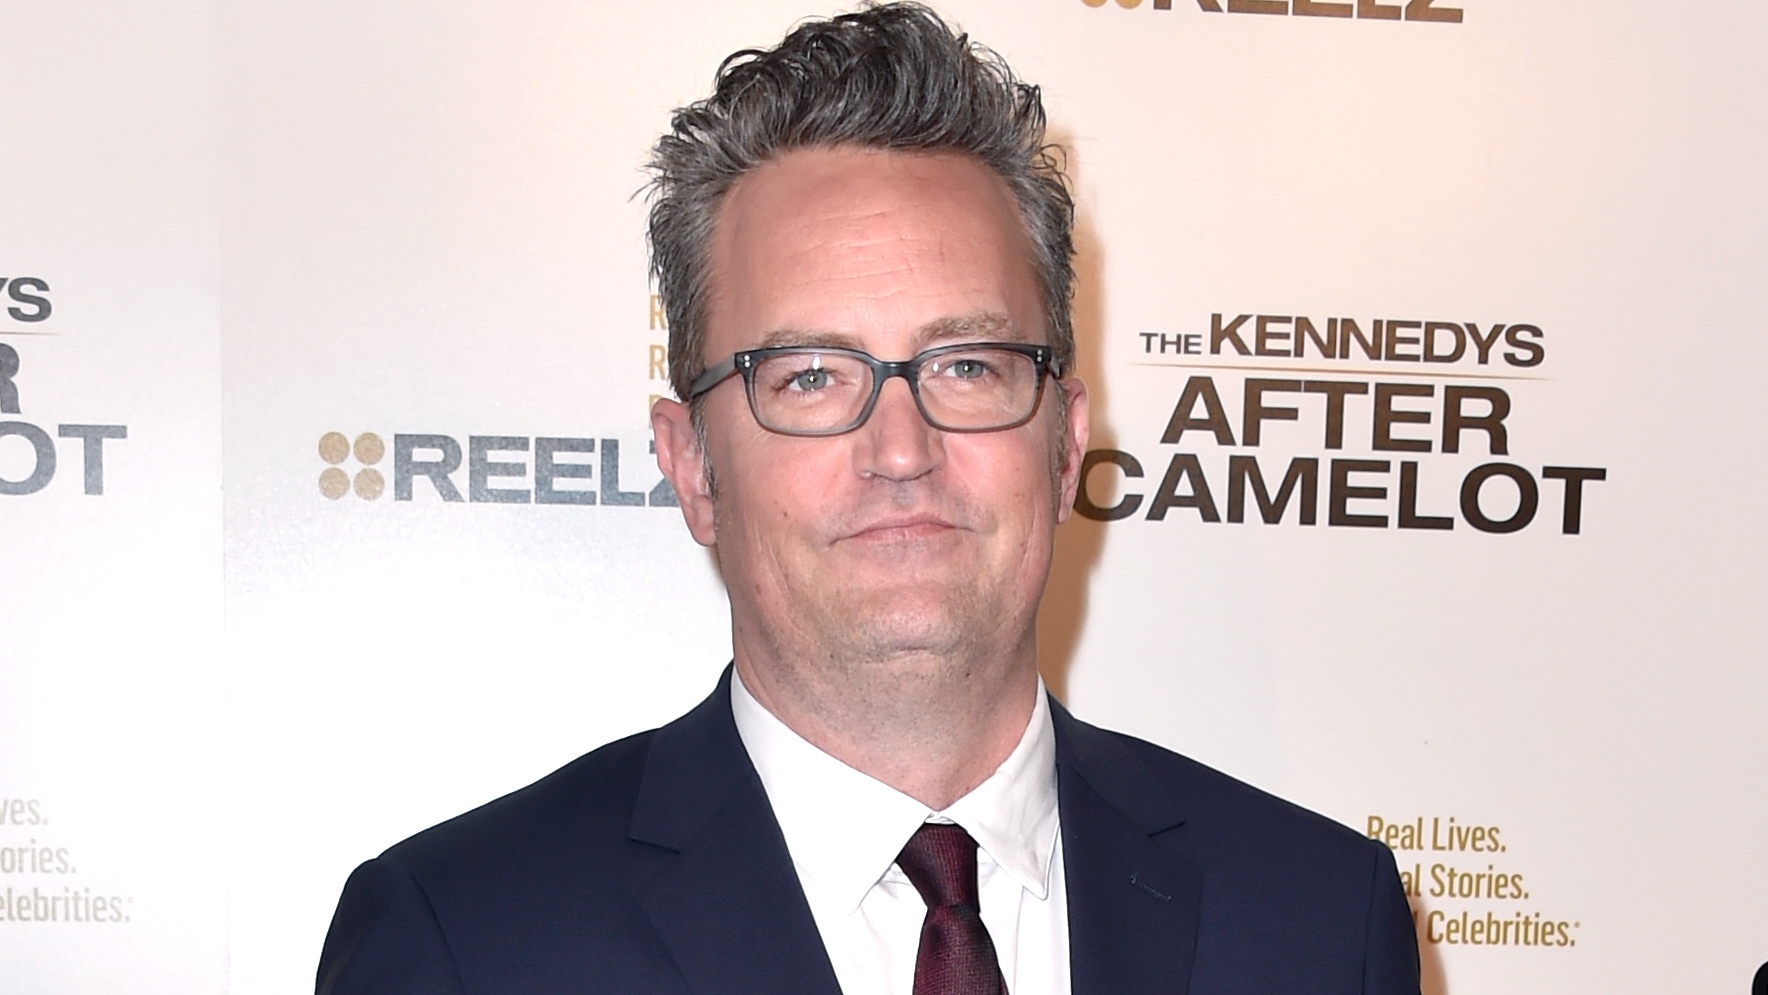 matthew perry the big terrible thing